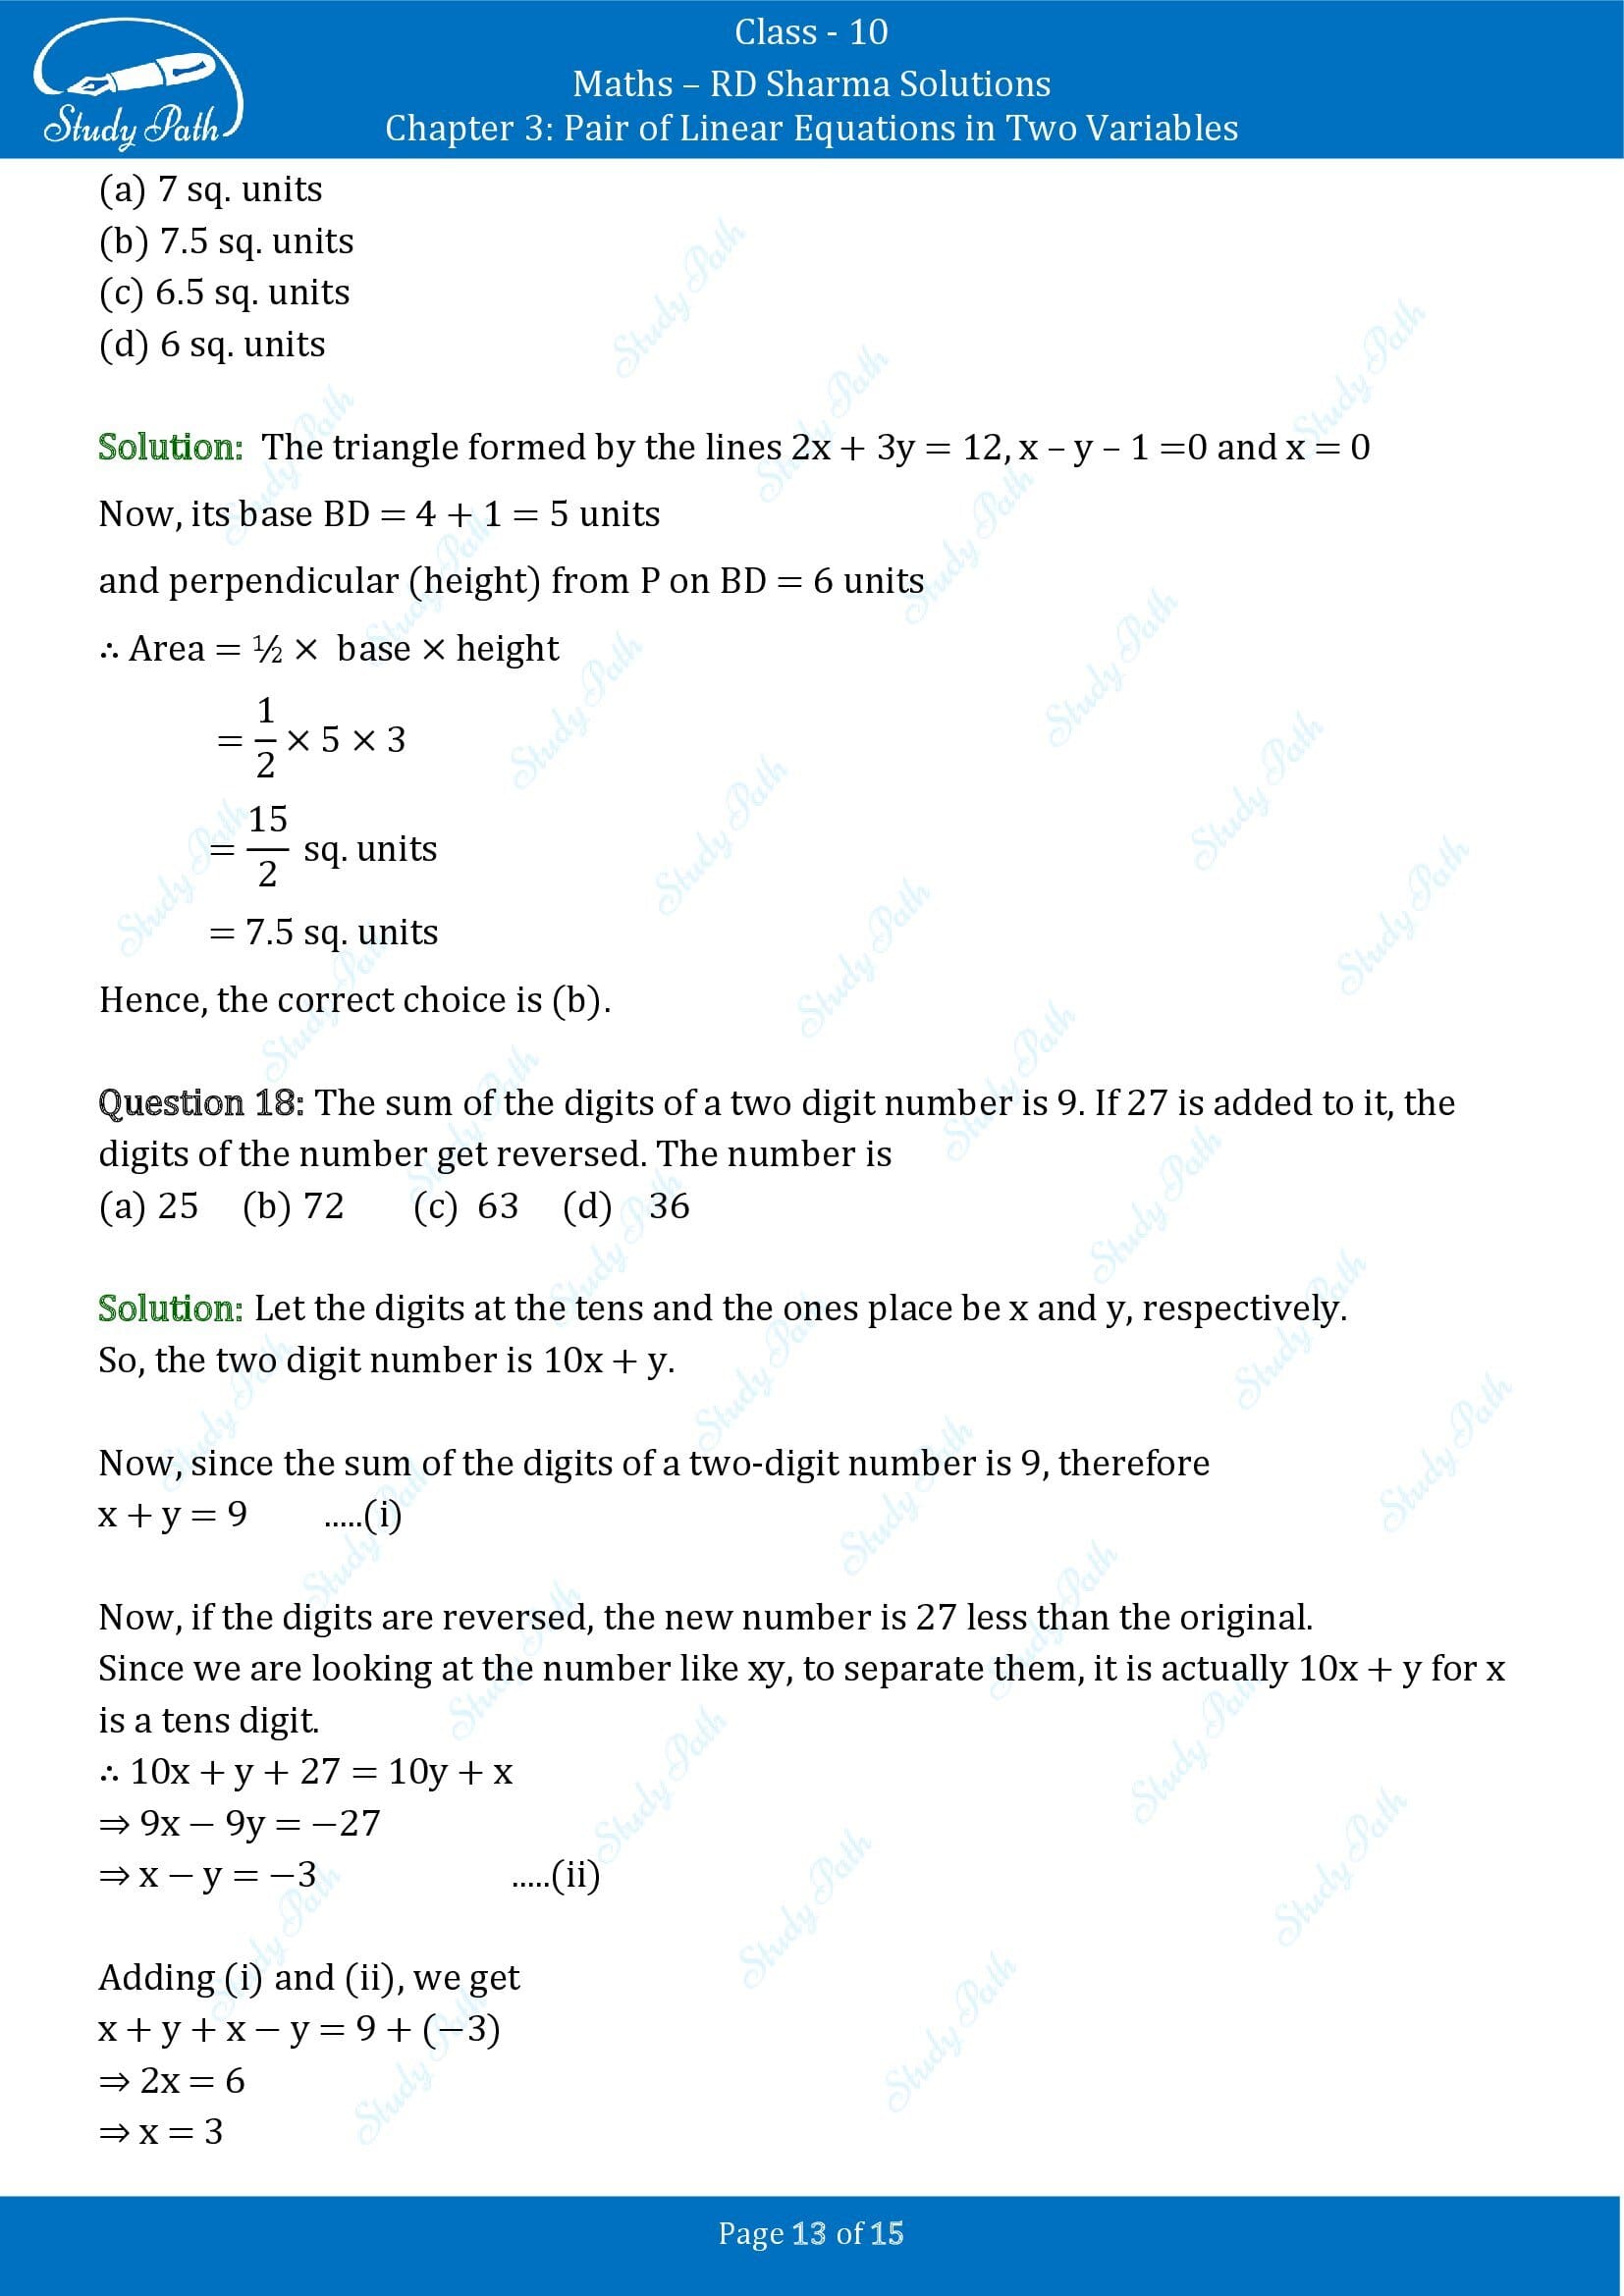 RD Sharma Solutions Class 10 Chapter 3 Pair of Linear Equations in Two Variables Multiple Choice Questions MCQs 00013